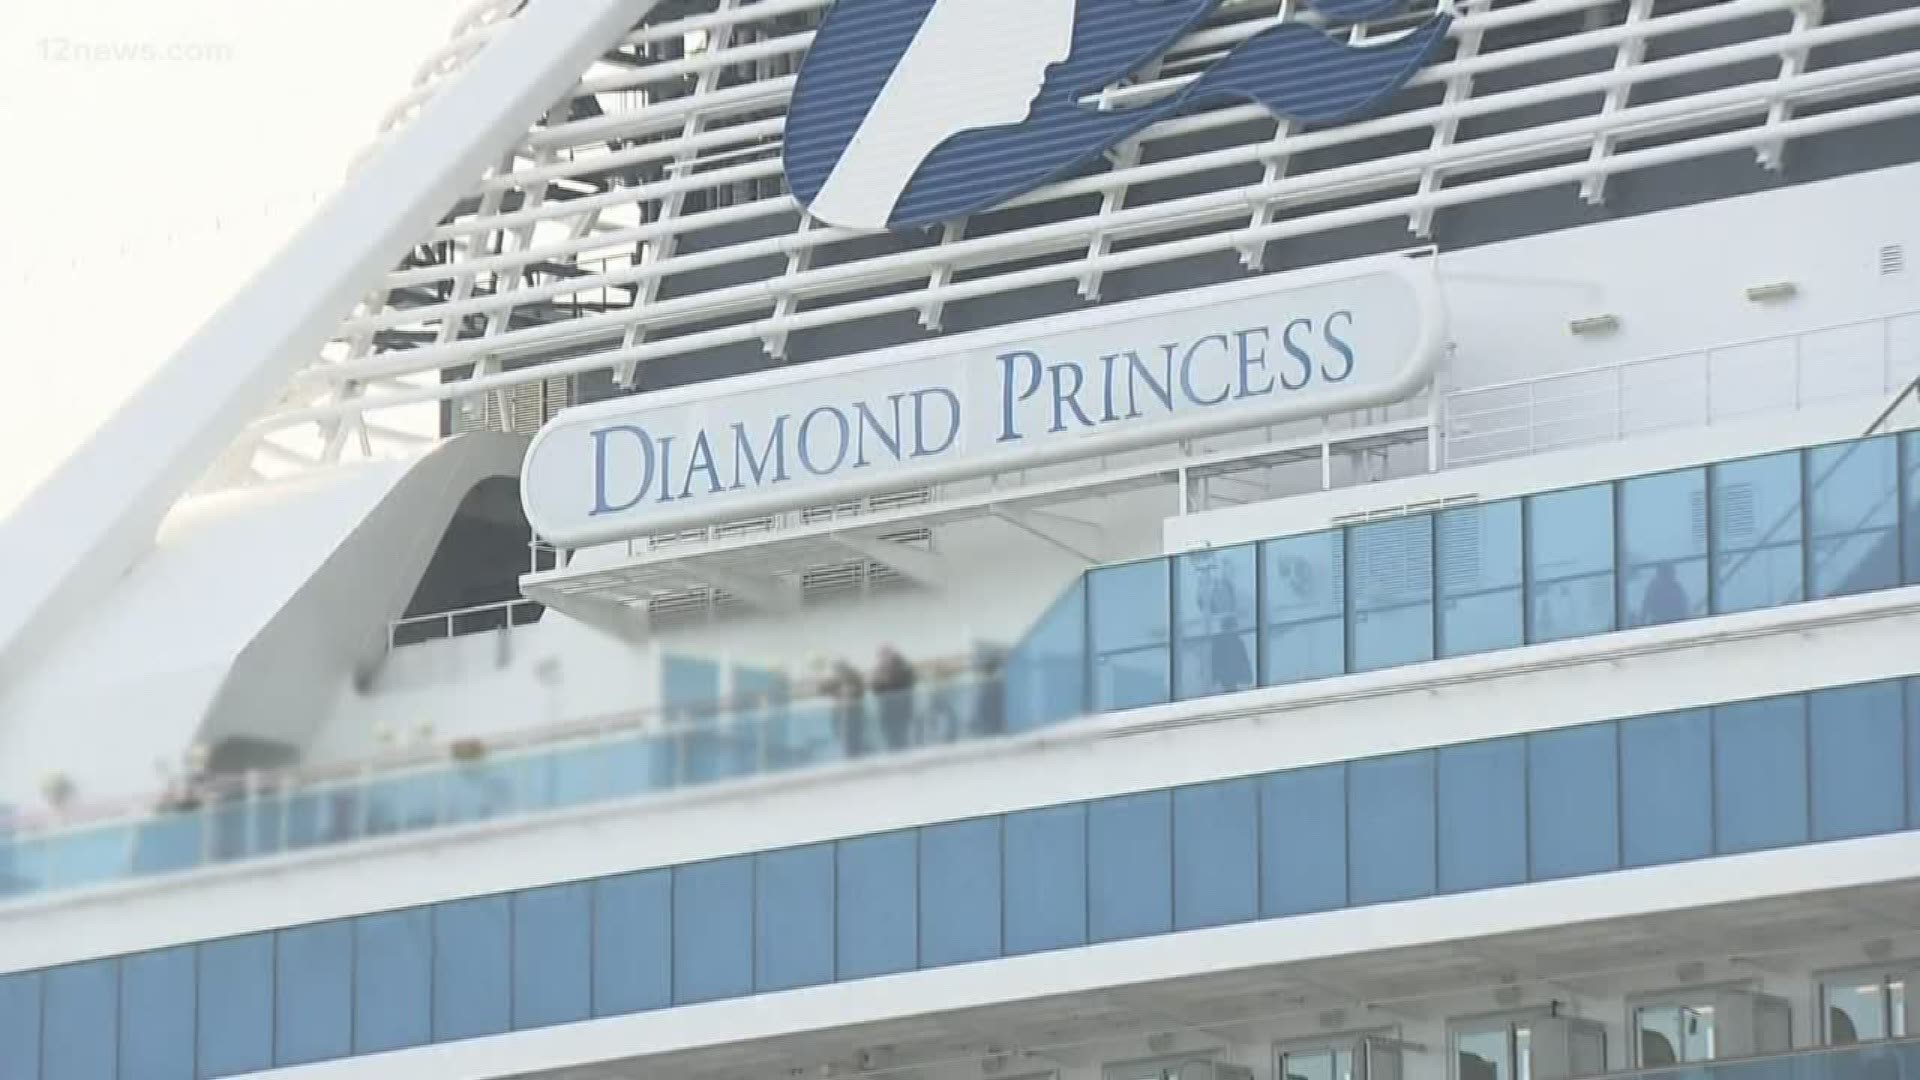 The coronavirus has hundreds of passengers on a cruise ship stranded, including a couple from Glendale. As numbers of infected passengers on the ship grow.